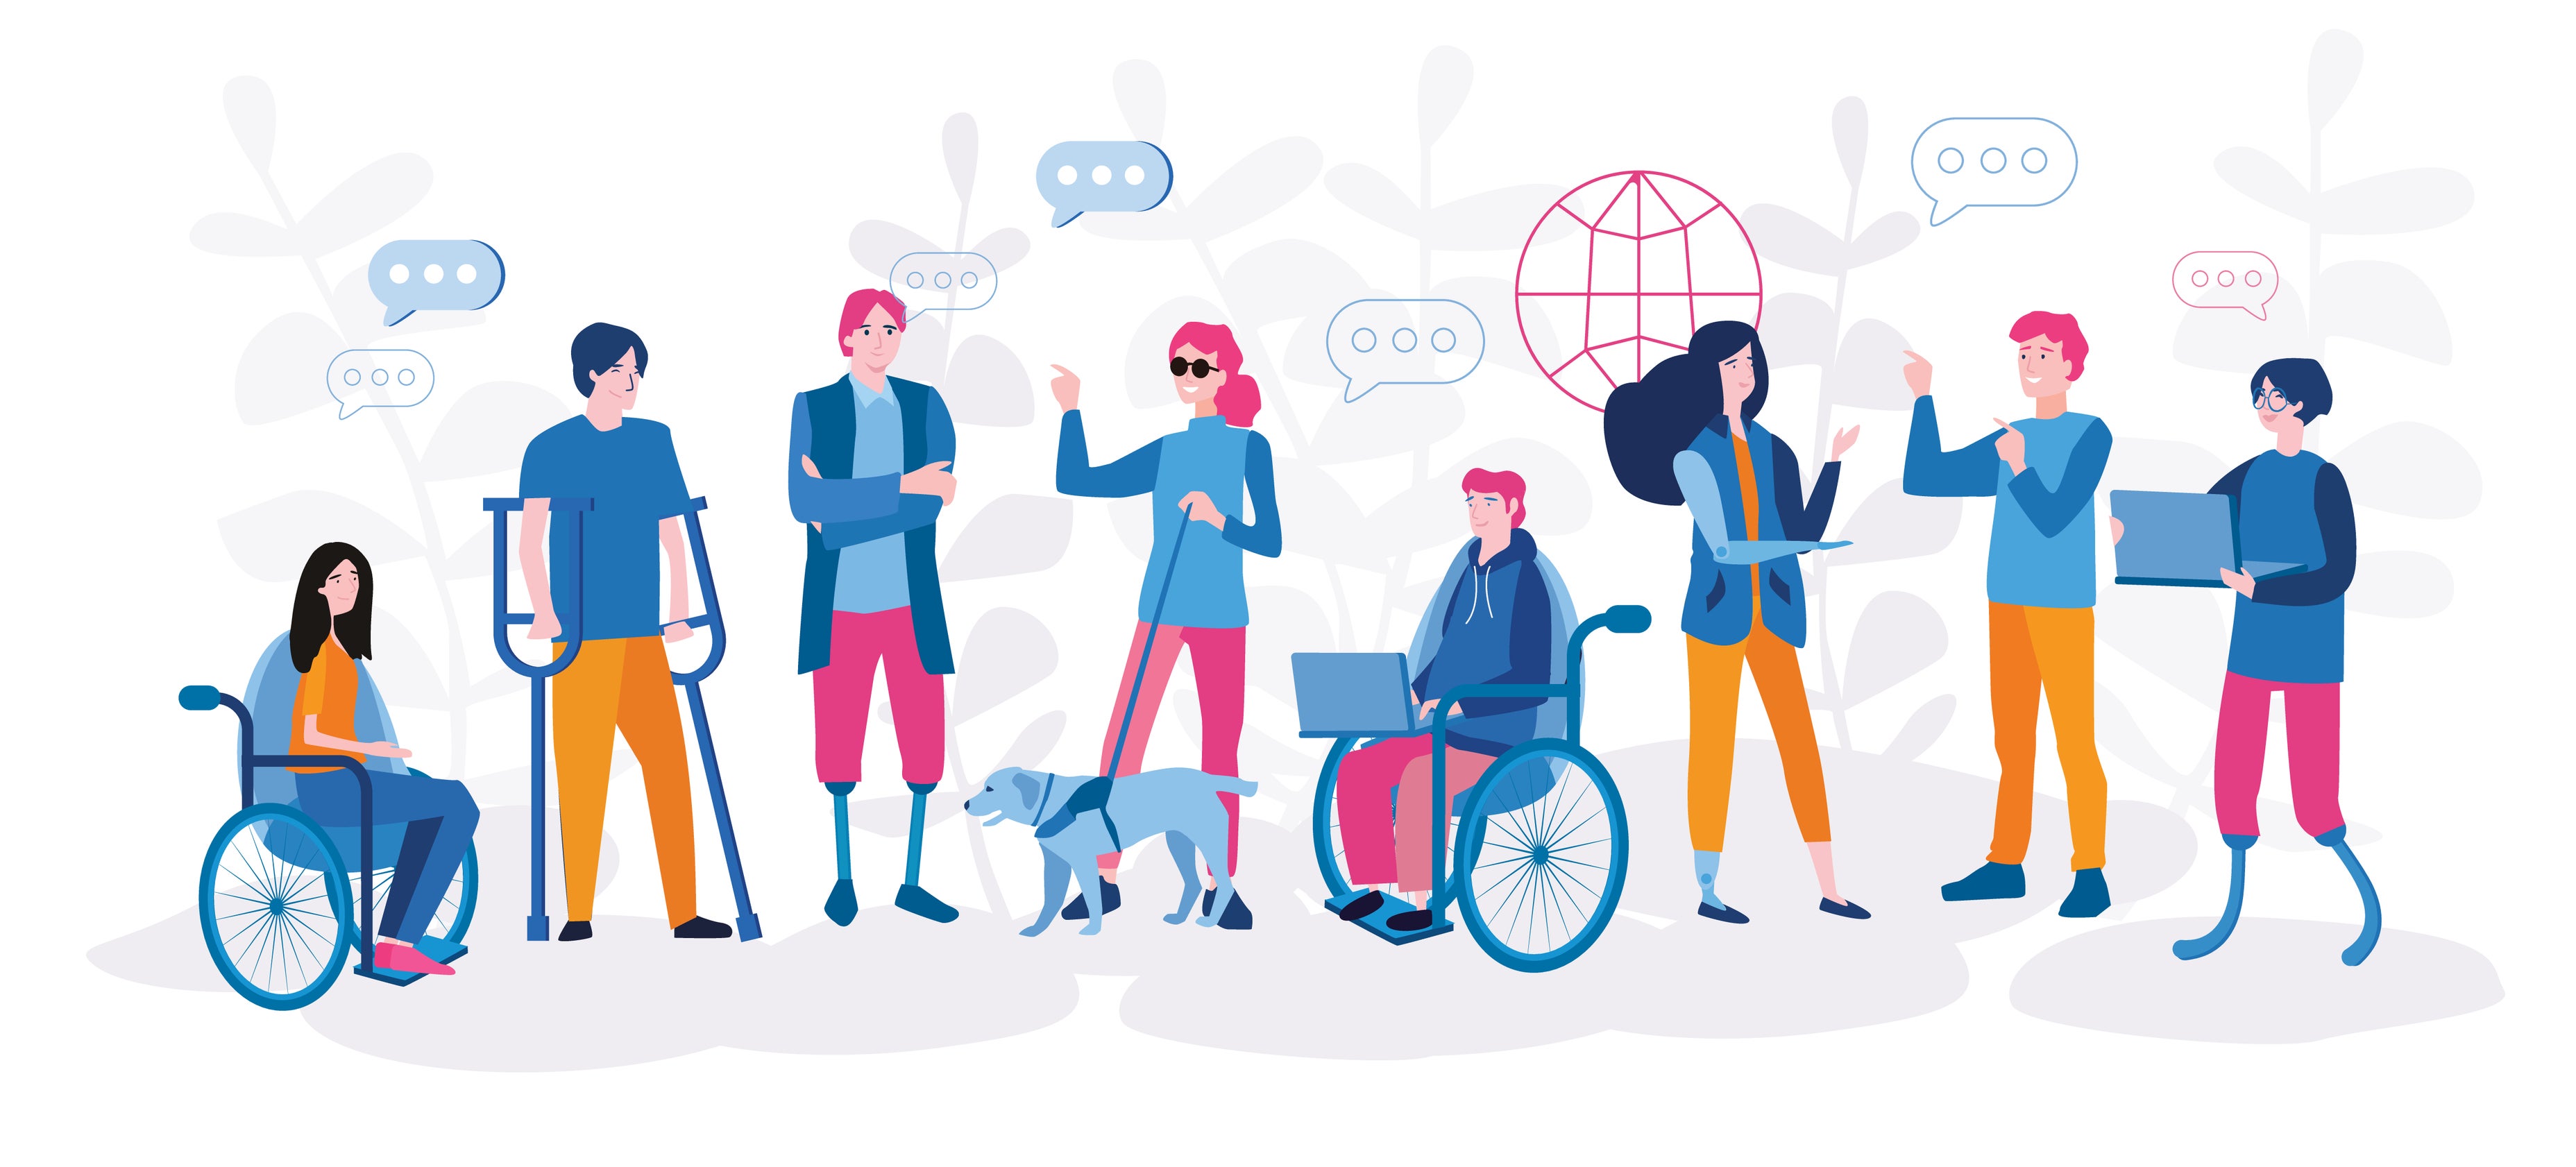 illustration of group of people with disabilities communicating in various ways includes whellechair with laptop, blind with dog pointing, crutches, signing, ...